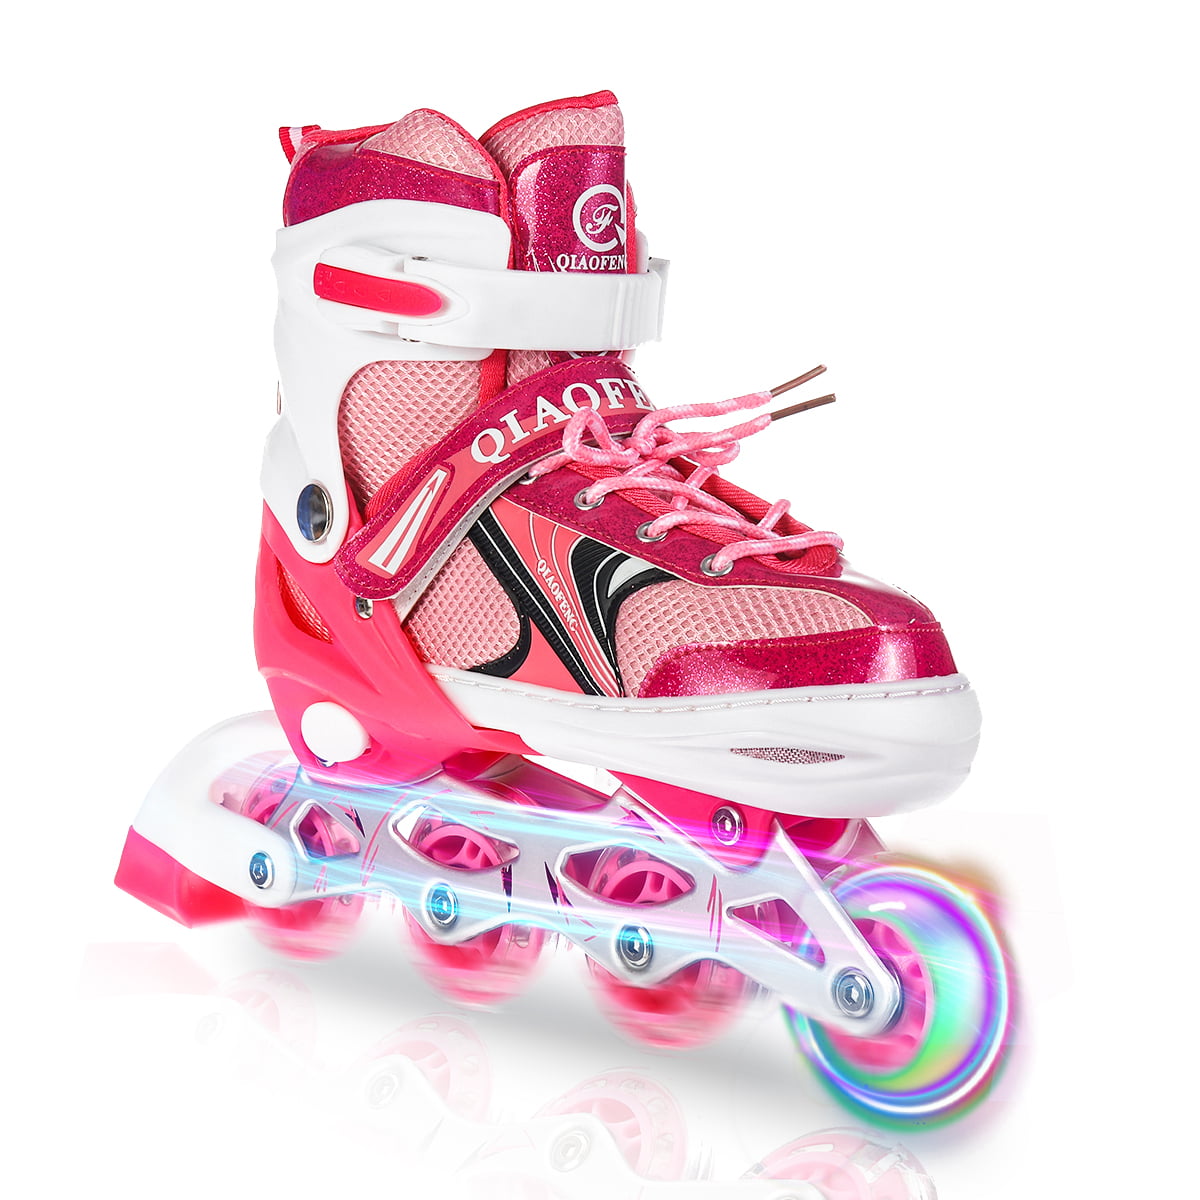 Details about   NEW Adjustable Inline Skates Roller Blades Adult Size 8-10.5 Breathable a e 86 